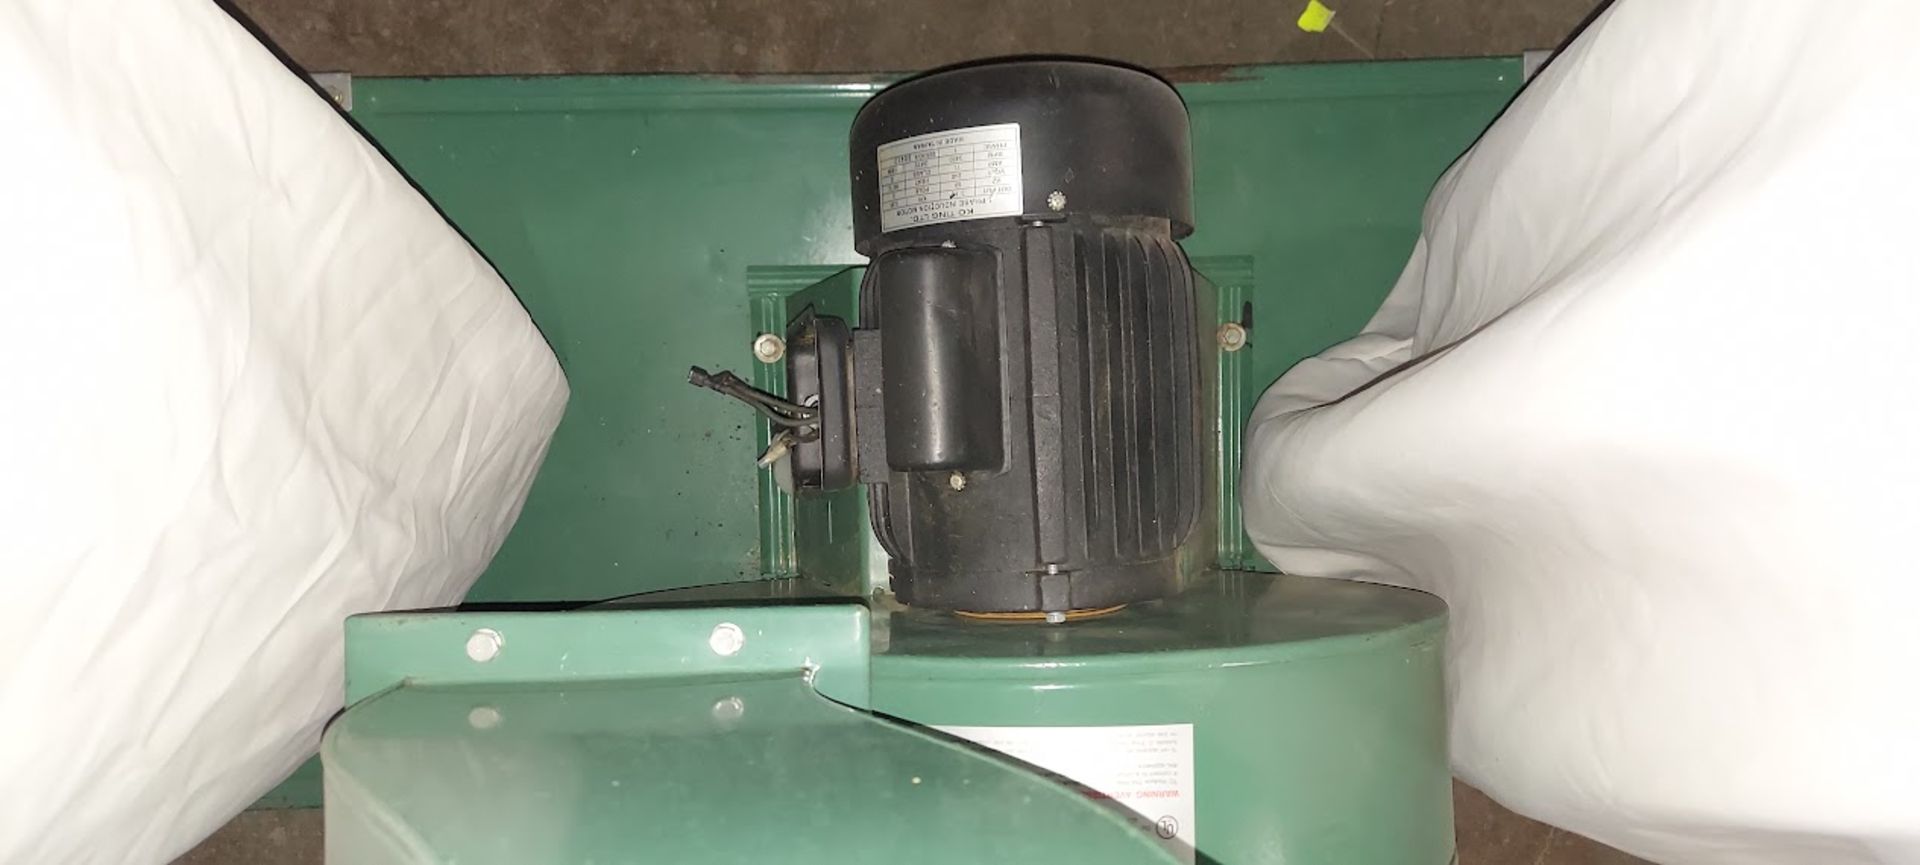 SECO 4-Bag Dust Collector, Model UFO-102, 240V 1ph - Image 3 of 3